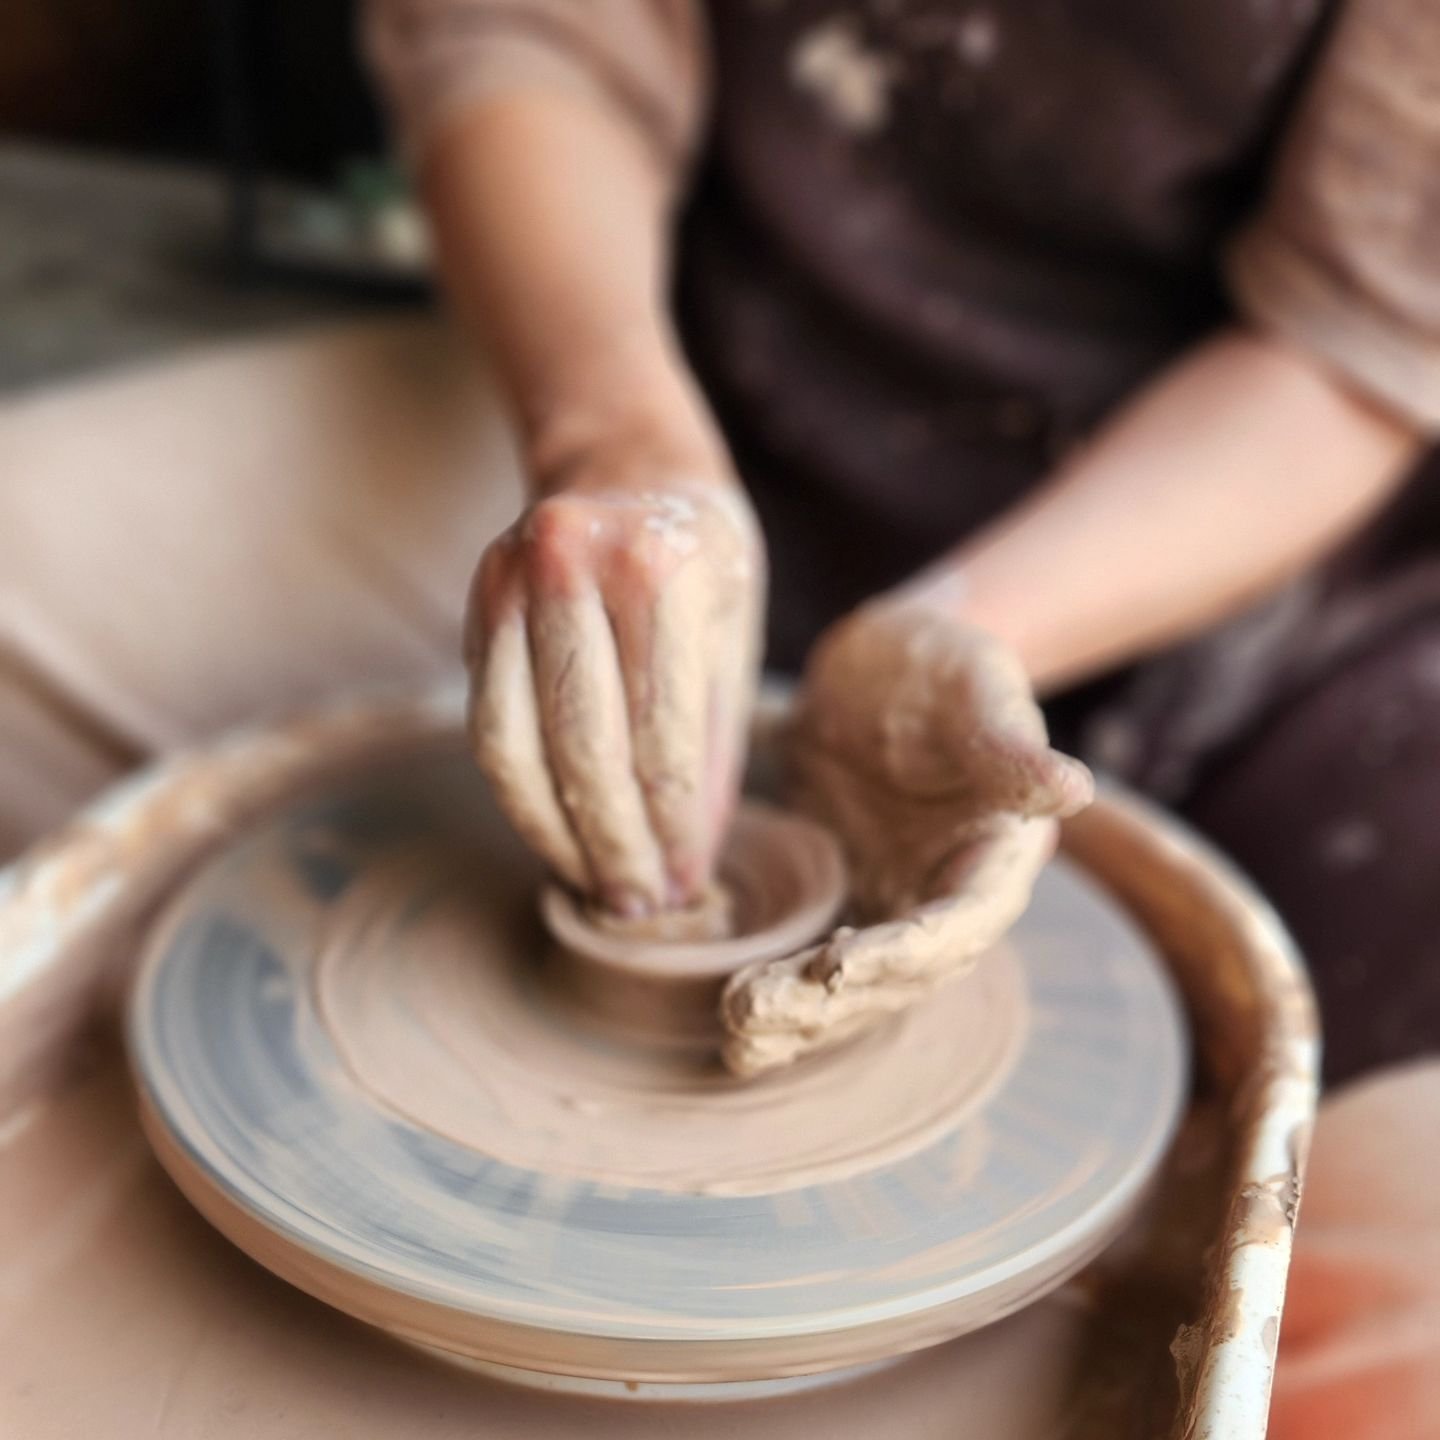 RESPECT. I have always been obsessed with handmade ceramics, but now I have a newly found admiration for the skill these artists have. I attended a workshop at @botanica_home in San Diego with my friend (pictured here) on wheel throwing. It was SO HA